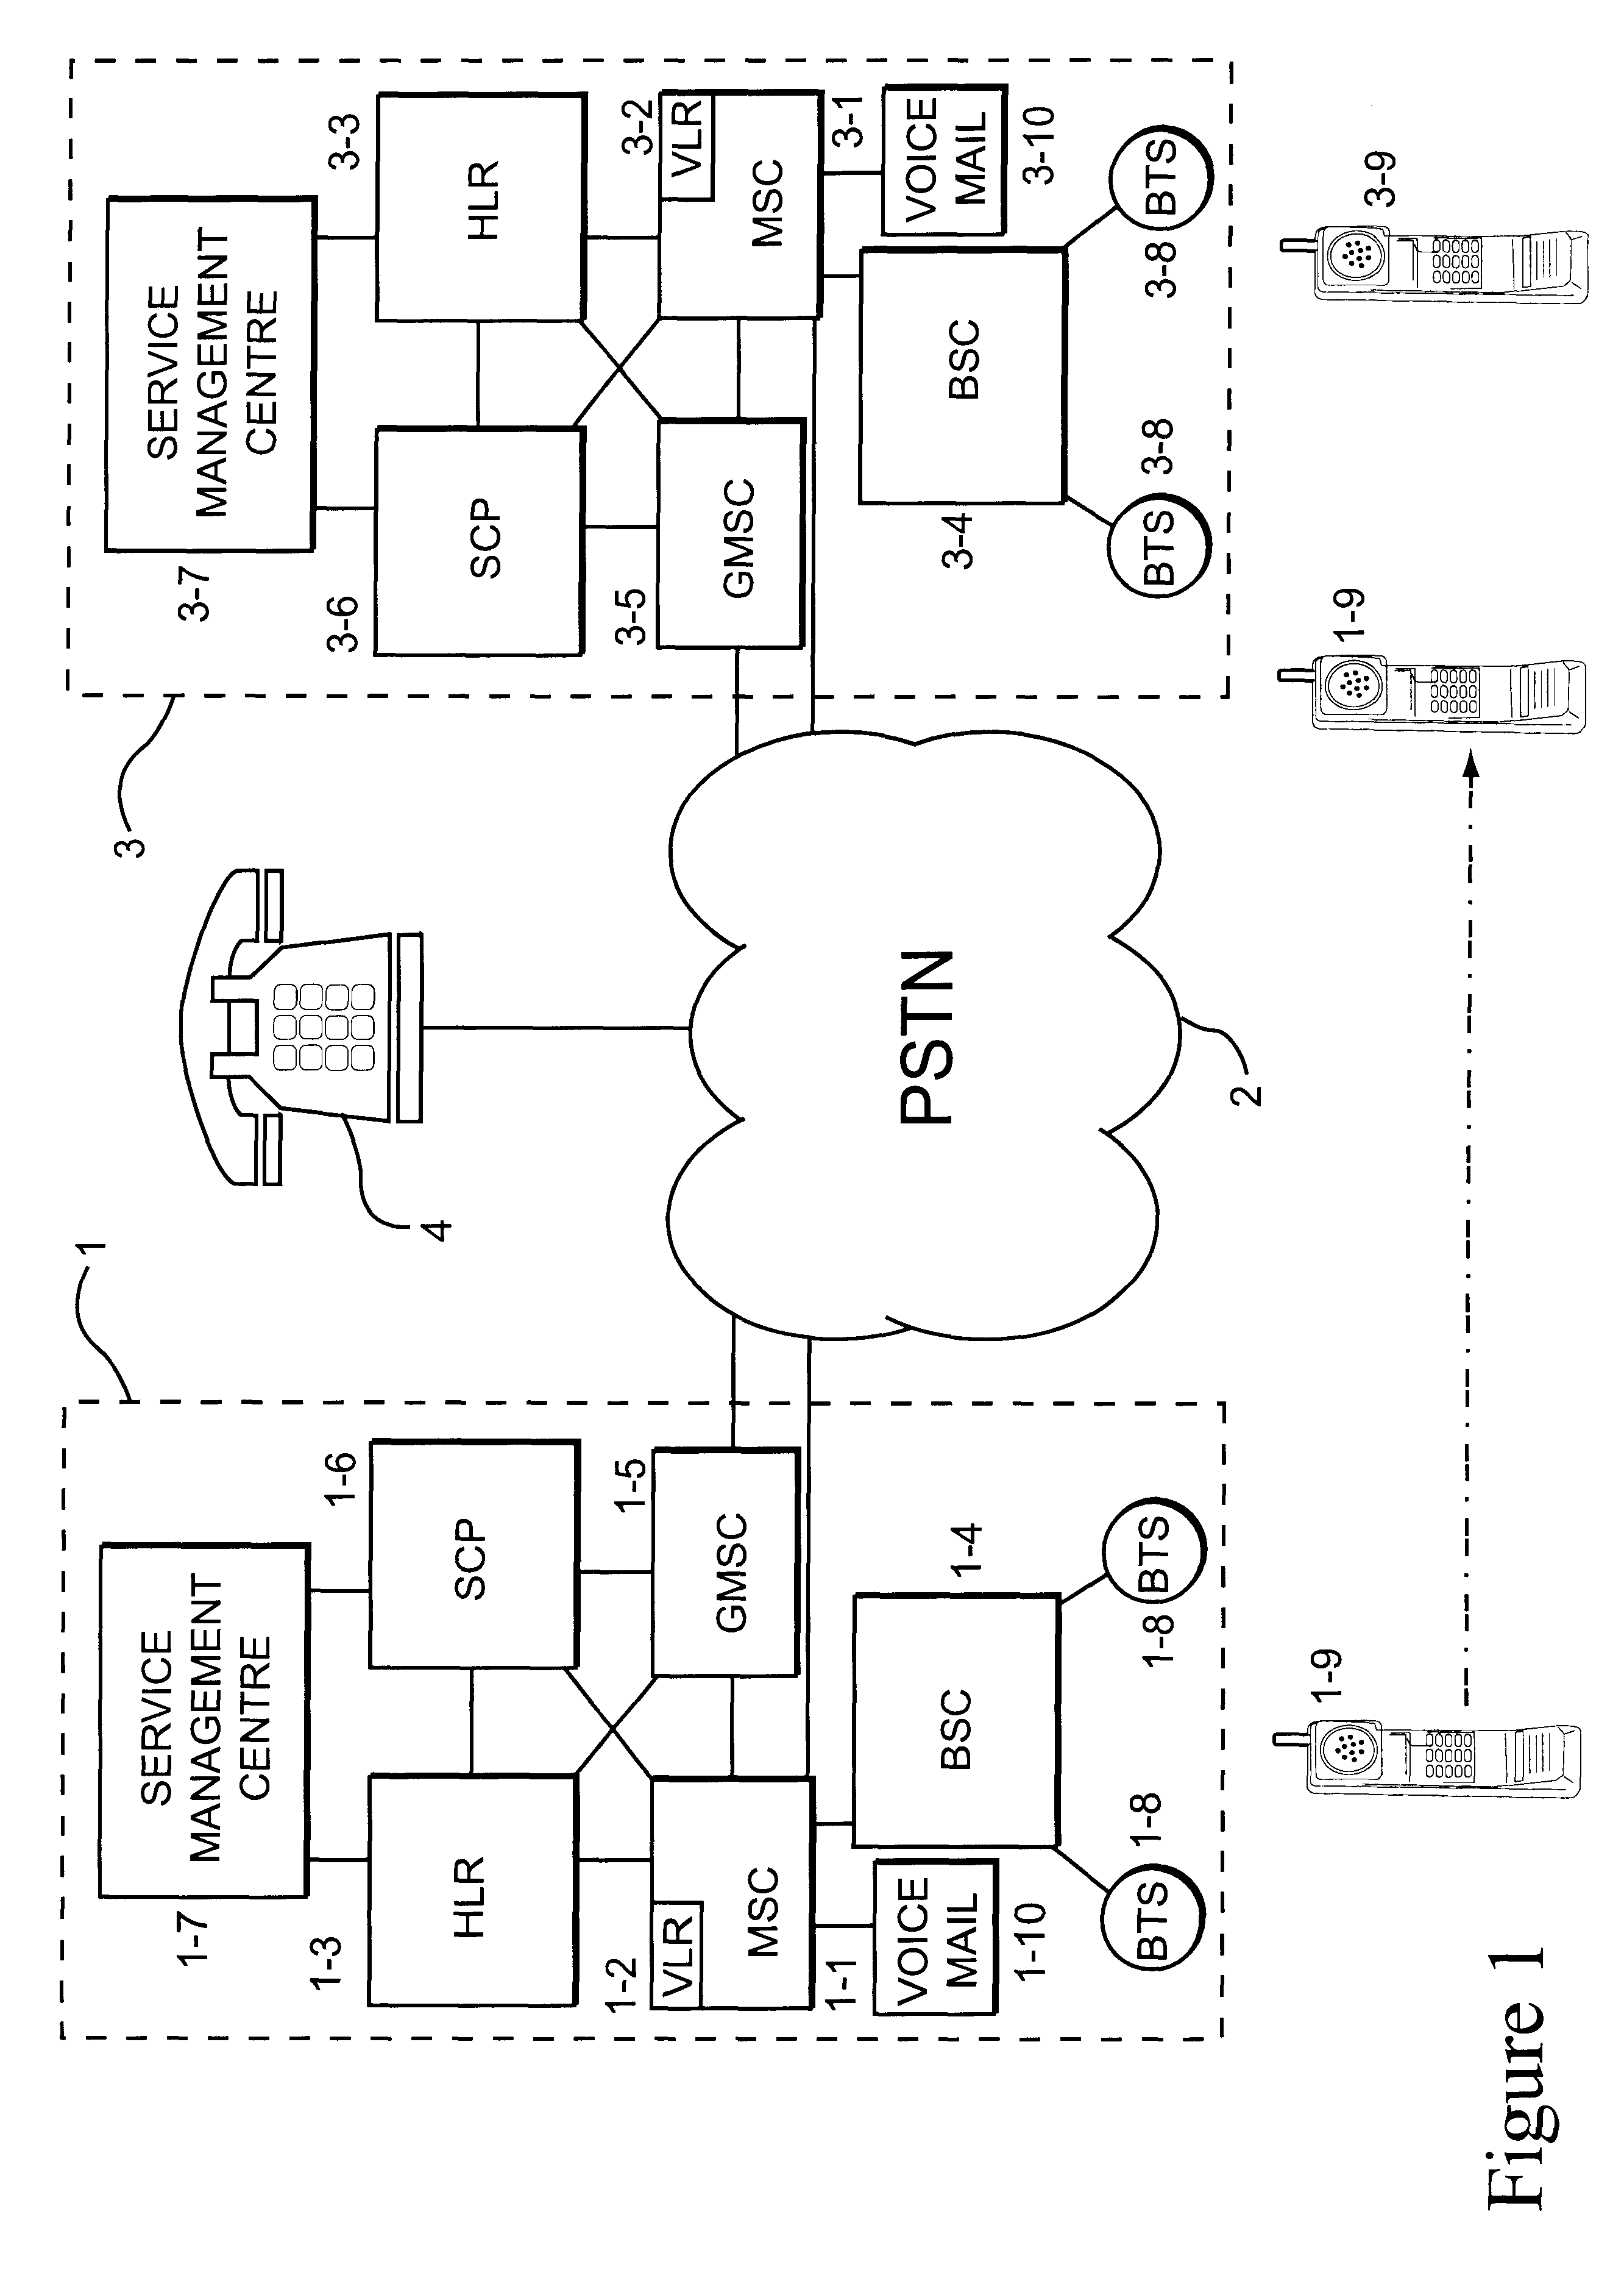 Location dependent service for mobile telephones